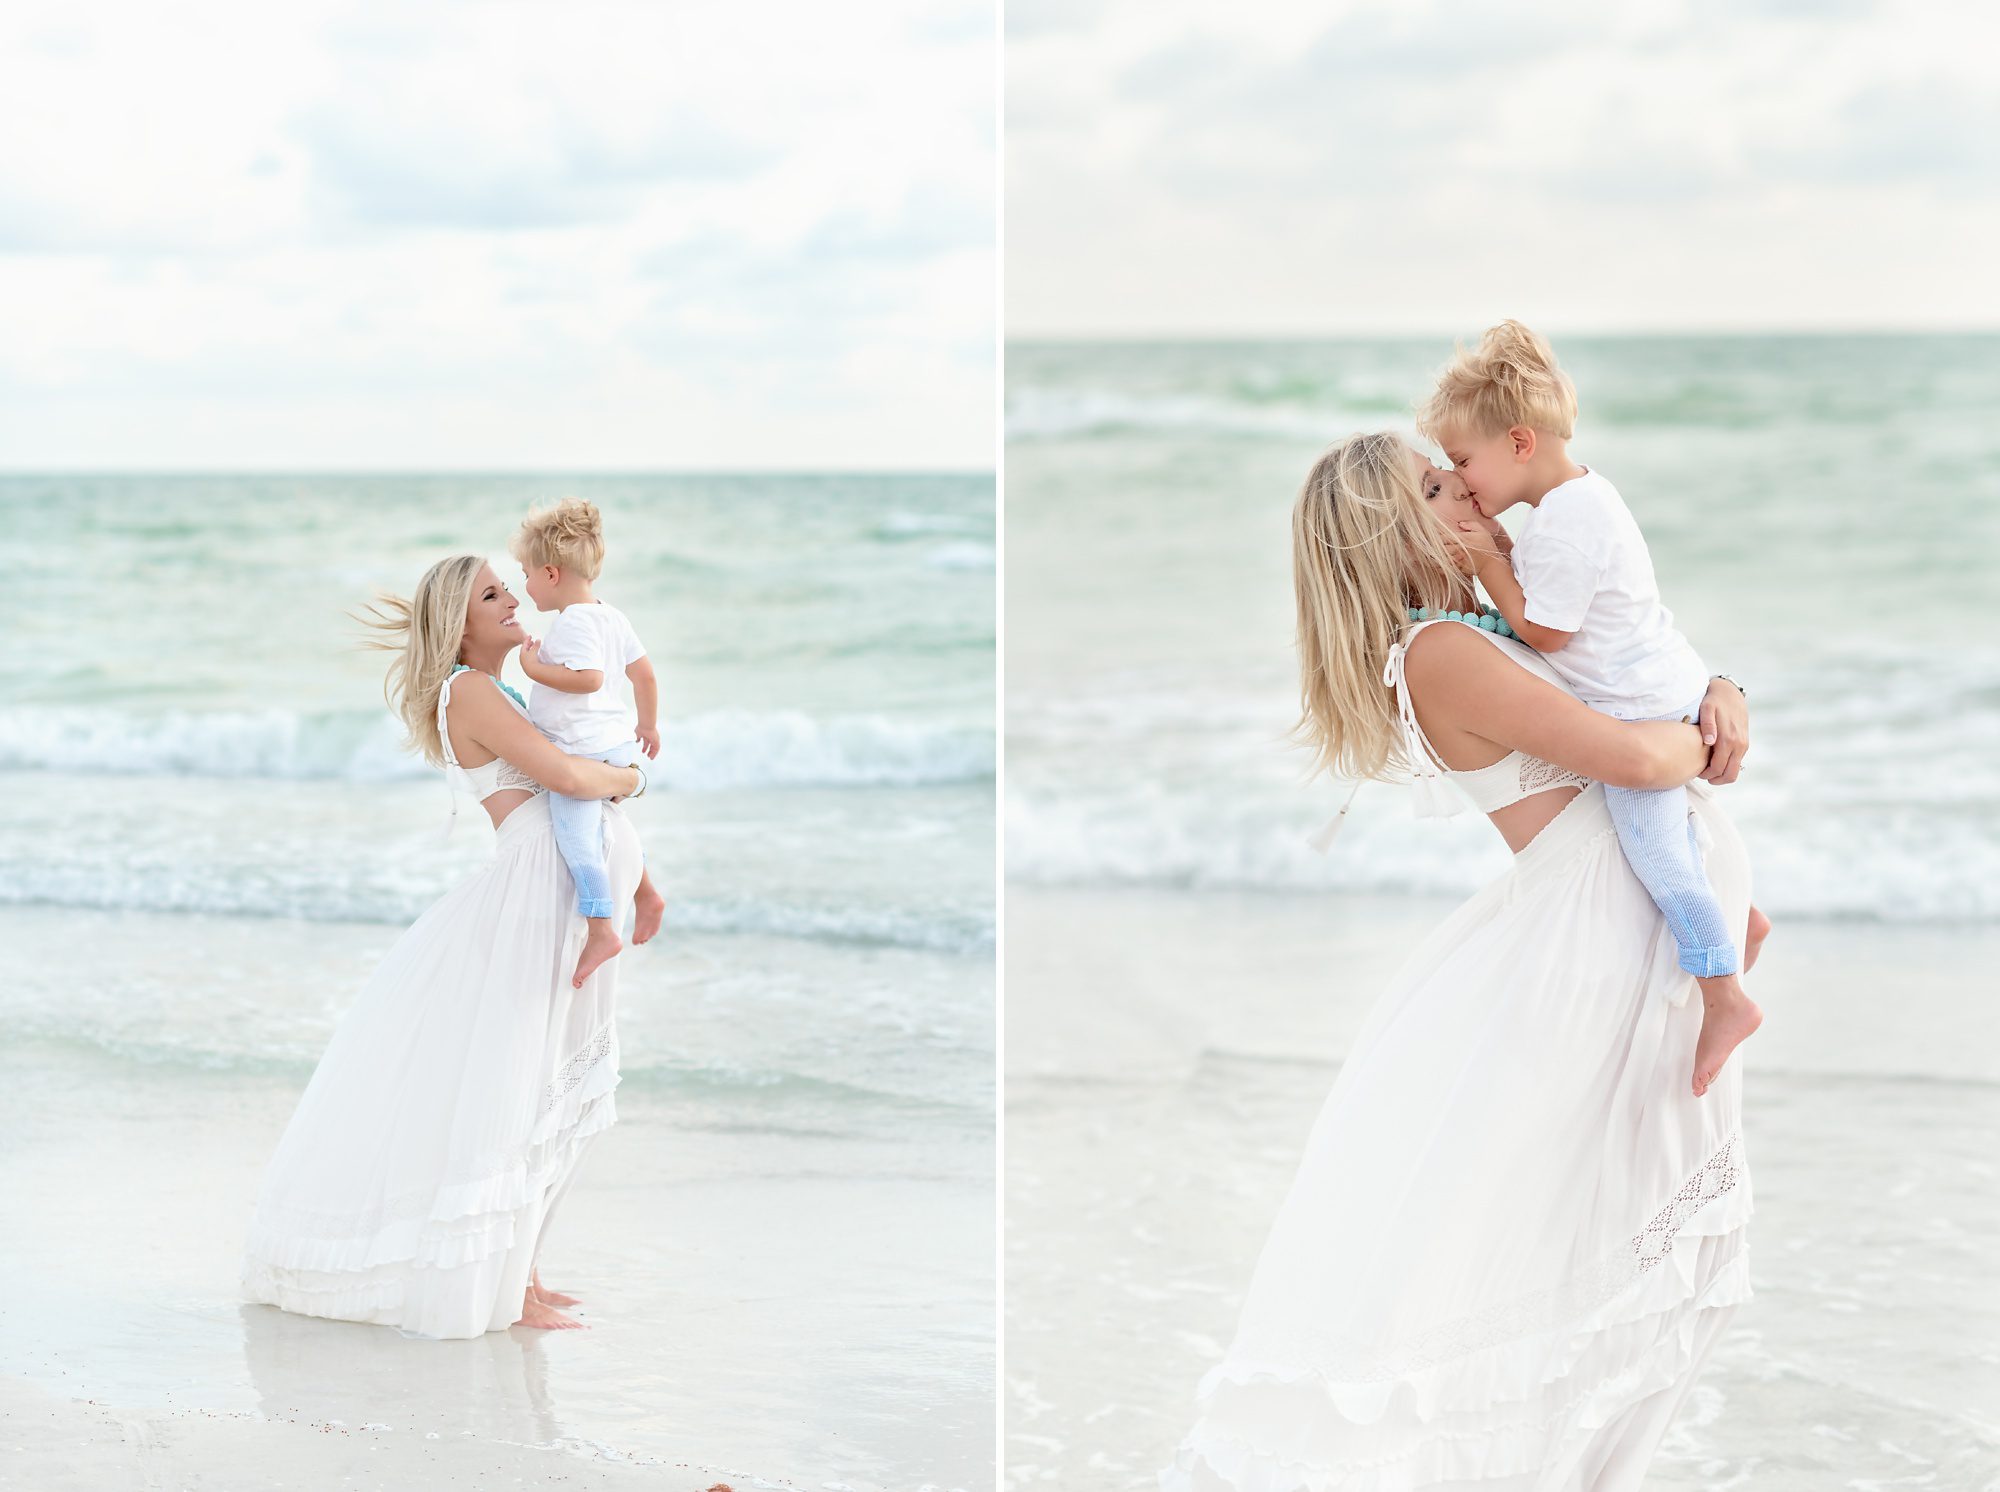 A beautiful blonde family of 3 gets family & maternity photos done on a beach in Redington Shores, FL at sunset time.